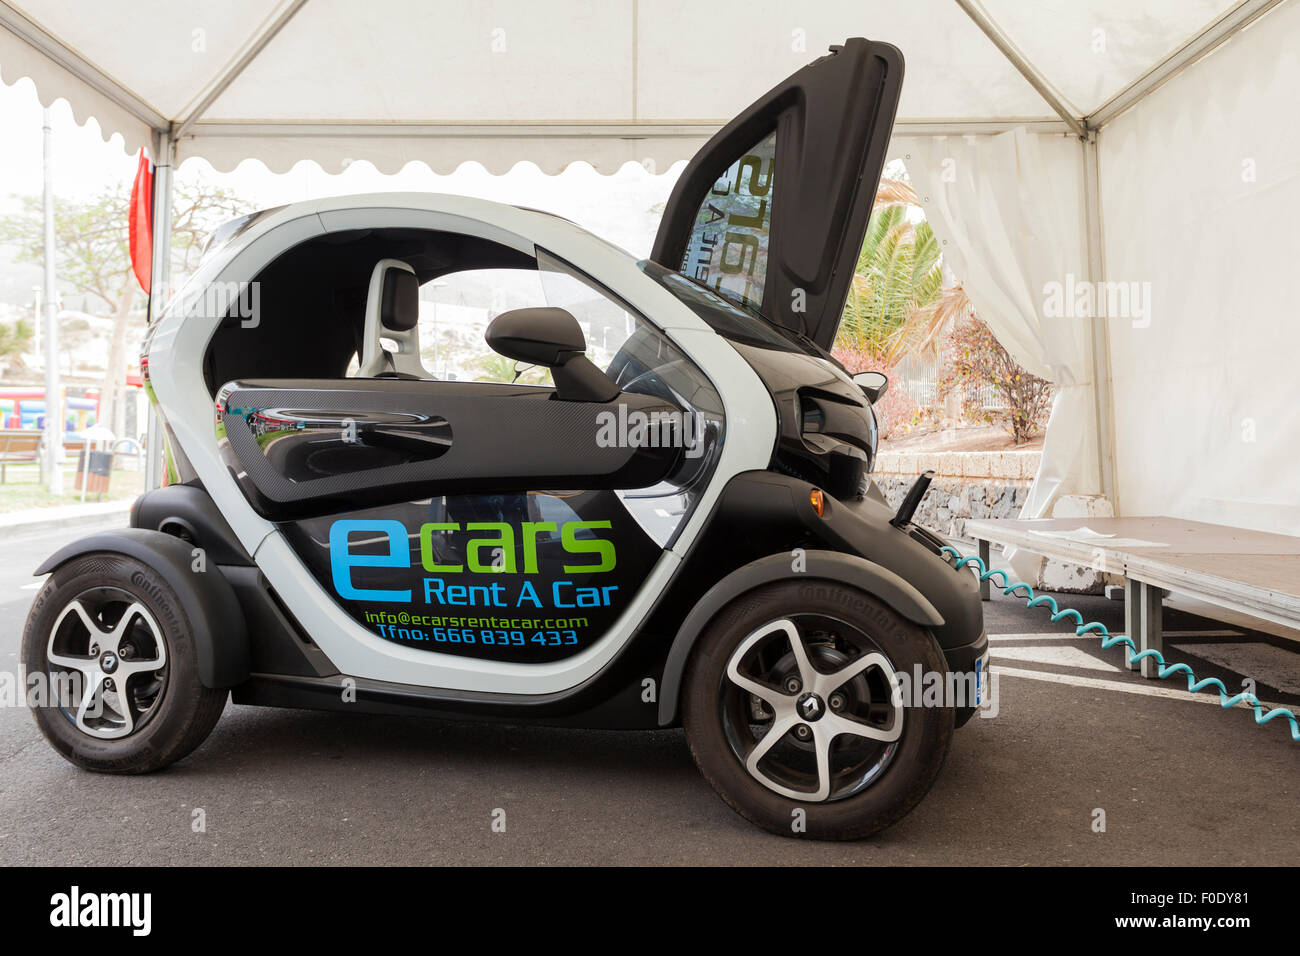 Renault Twizy electric car at a demonstration day for sustainable transport in Adeje, Tenerife, Canary Islands, Spain. Stock Photo